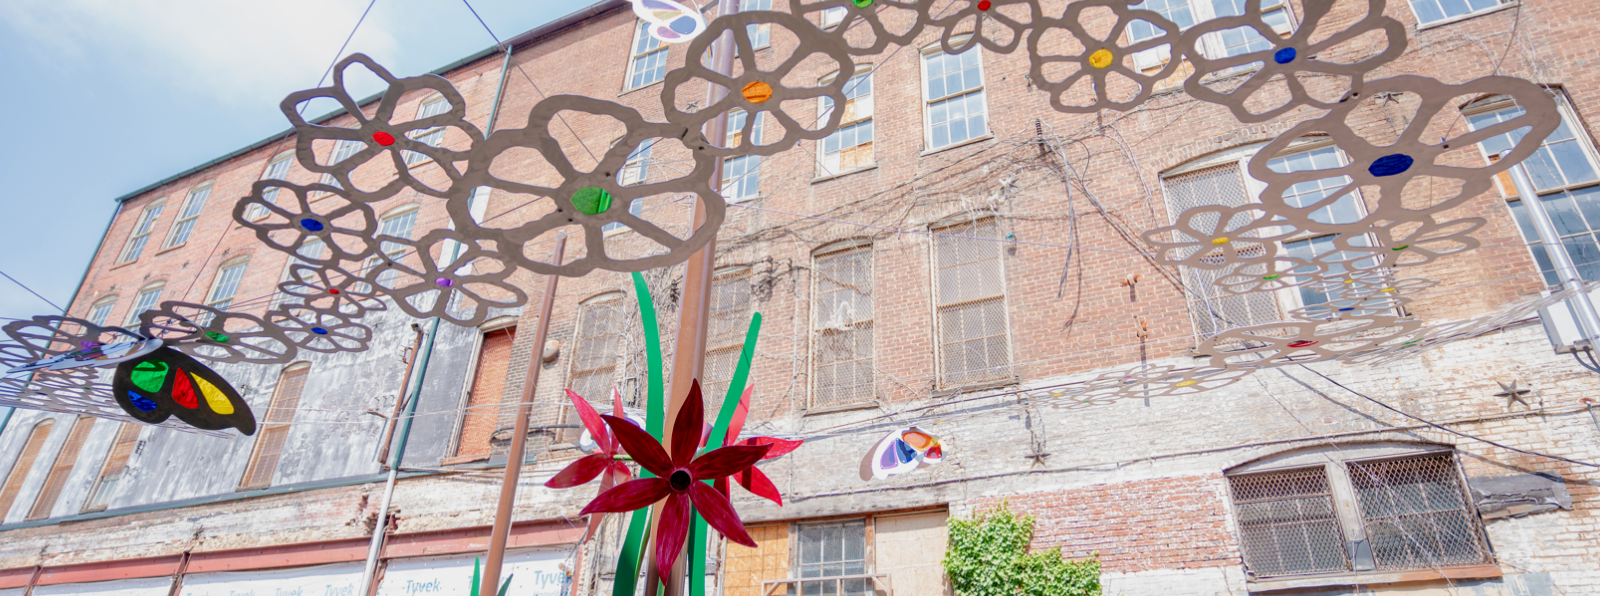 A hanging flower sculpture installation in front of a brick building.